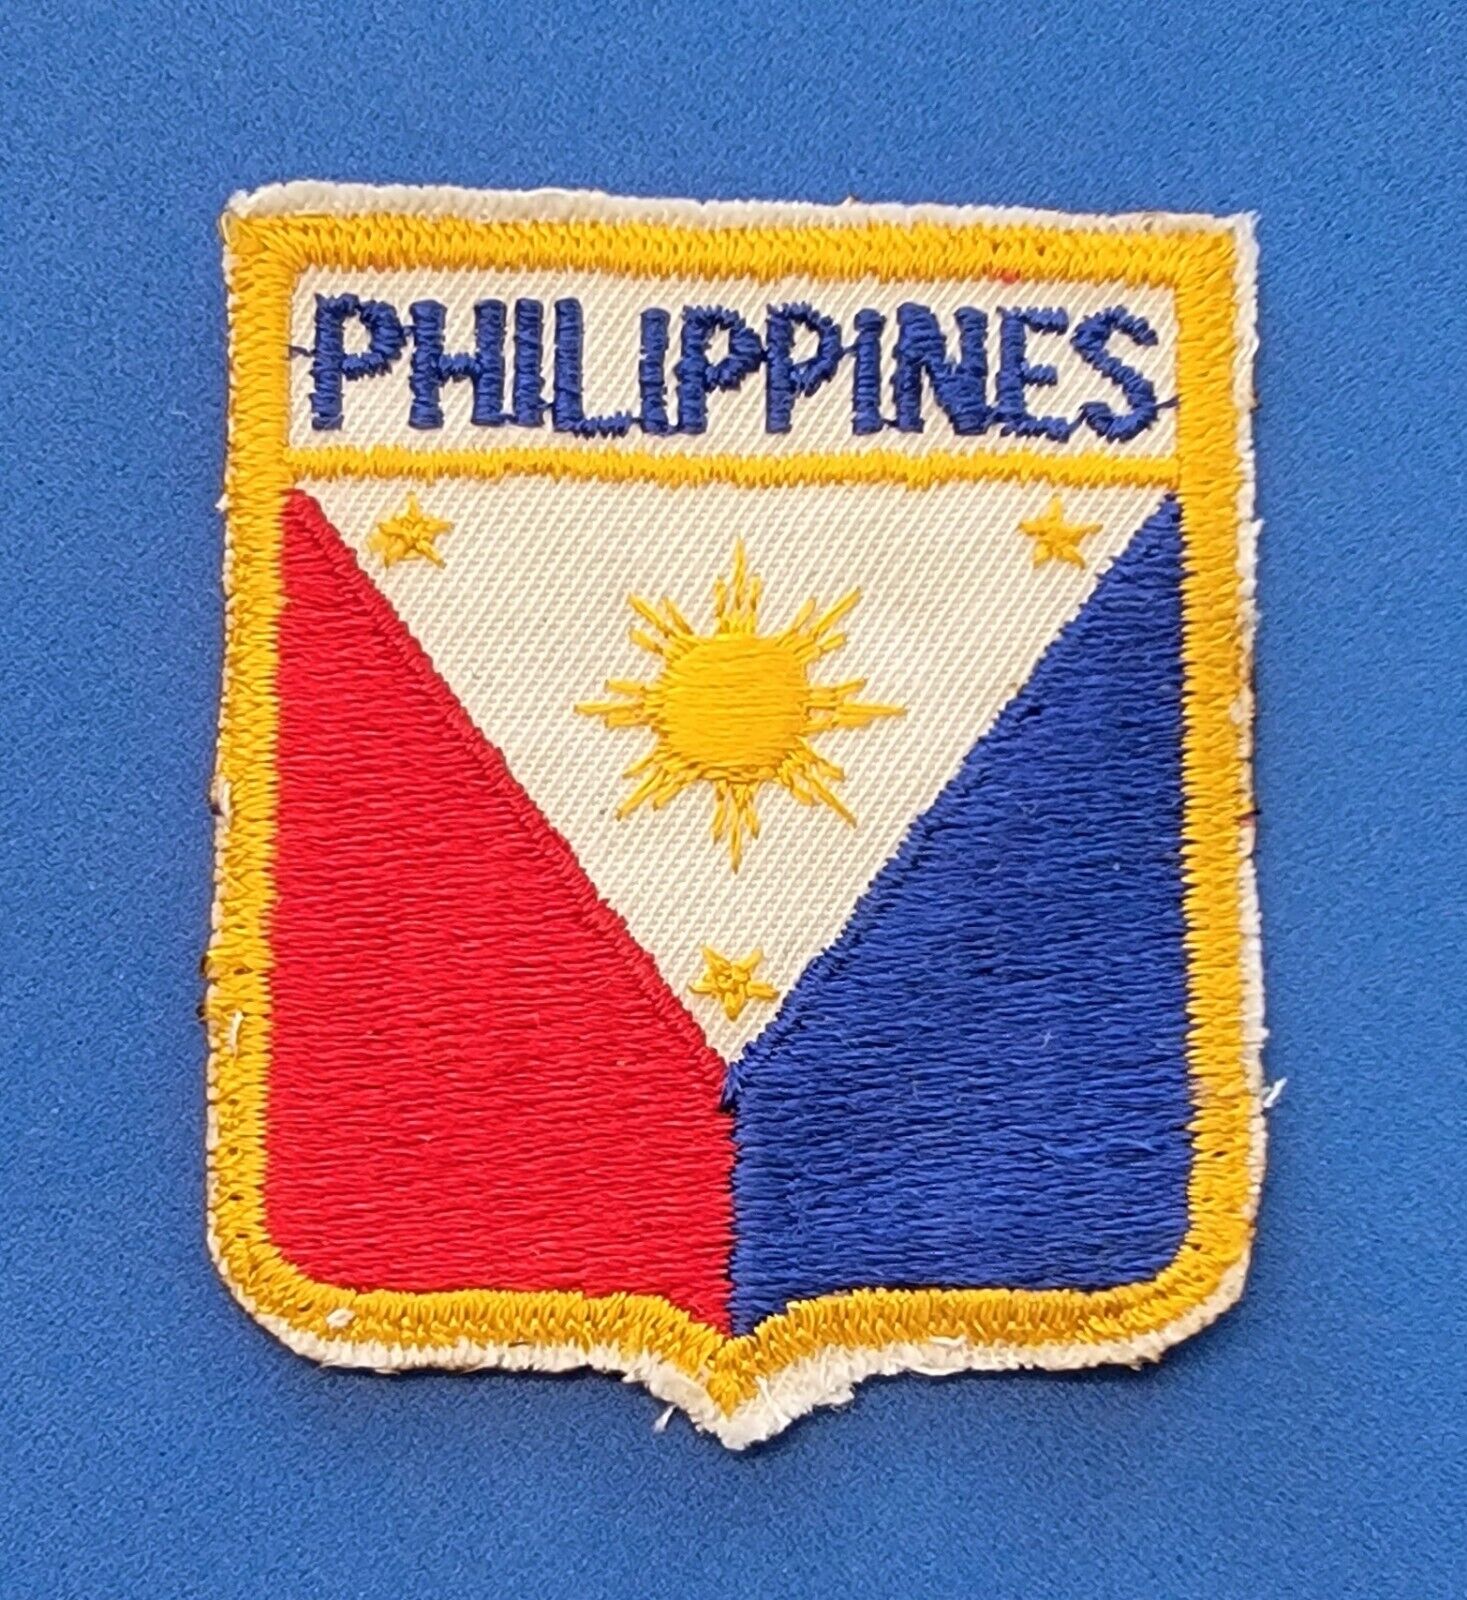 PHILIPPINES - PHILIPPINE NATIONAL FLAG PATCH Original Vintage Military?